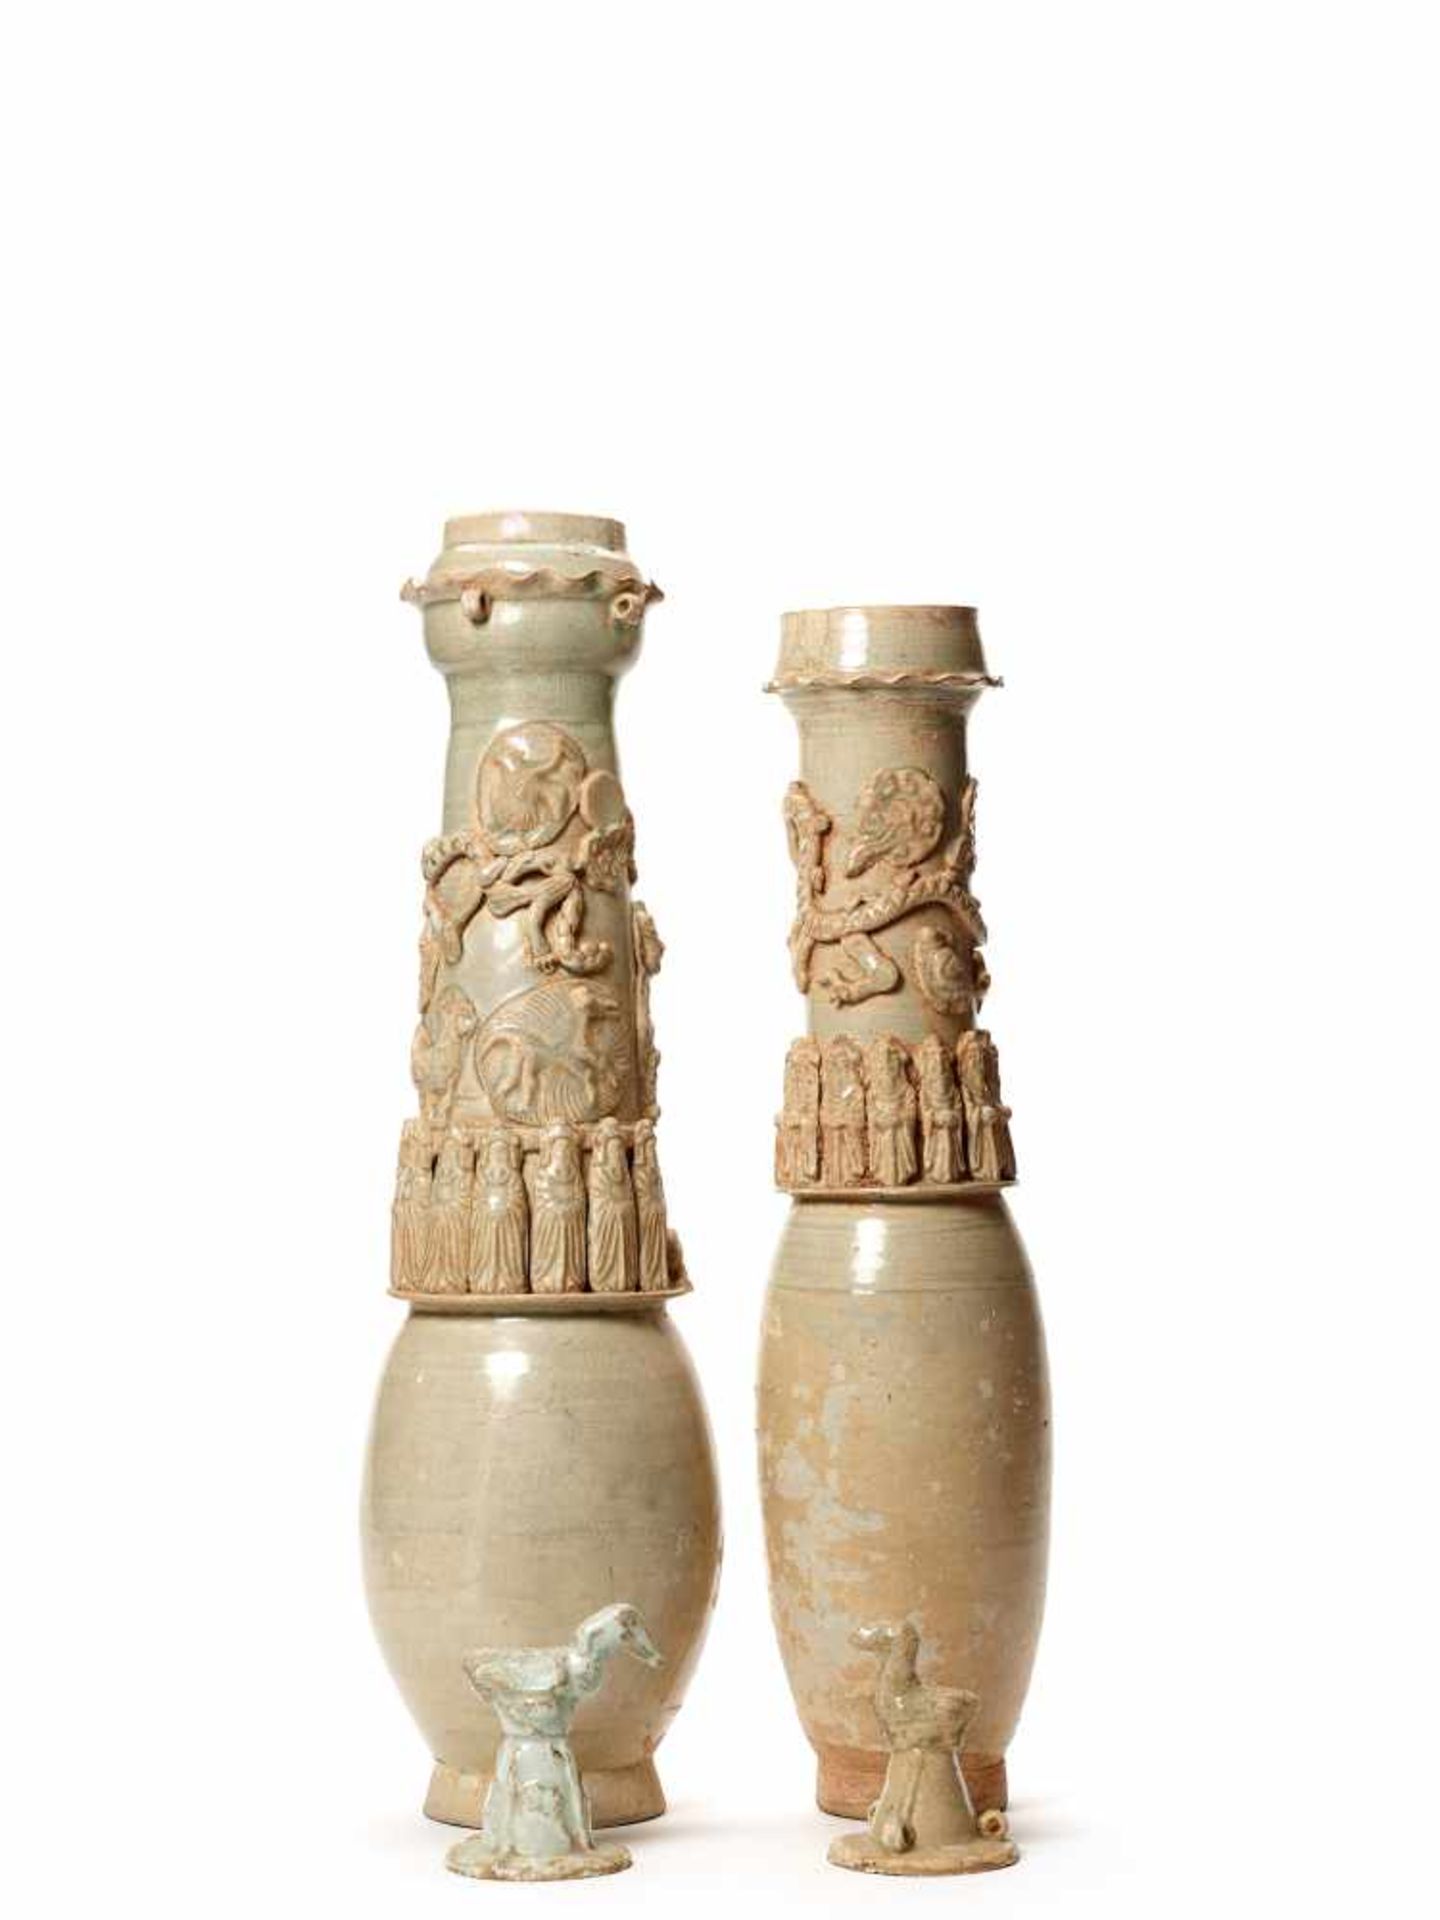 A PAIR OF LARGE CELADON-GLAZED URNS WITH COVERS, SONG DYNASTYBoth vessels with dragons, dignities - Bild 4 aus 4